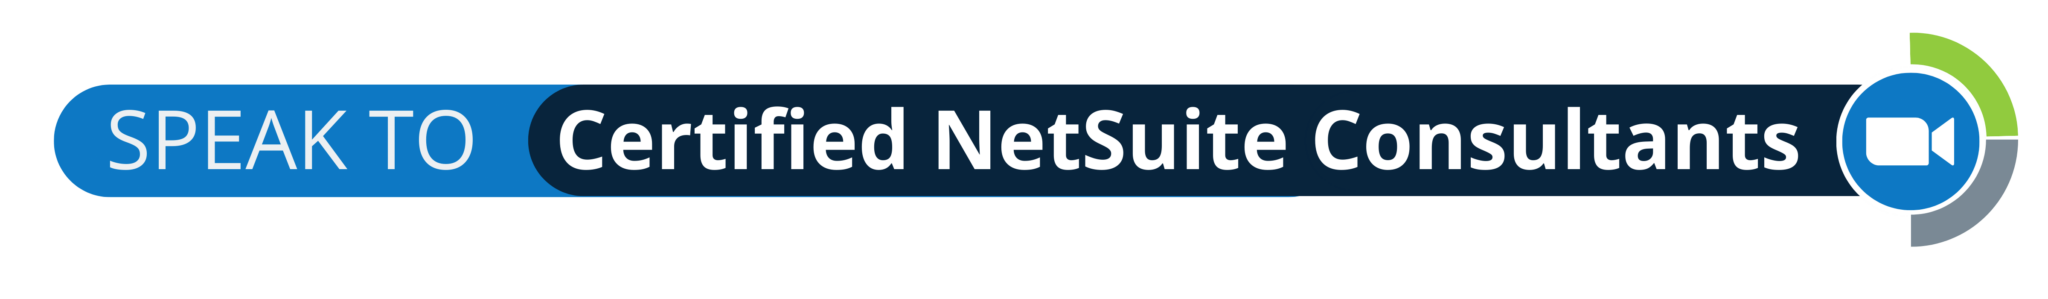 Work-with-Certified-NetSuite-Consultants-at-Fusion-CPA-for-independent-contractor-expense-approval